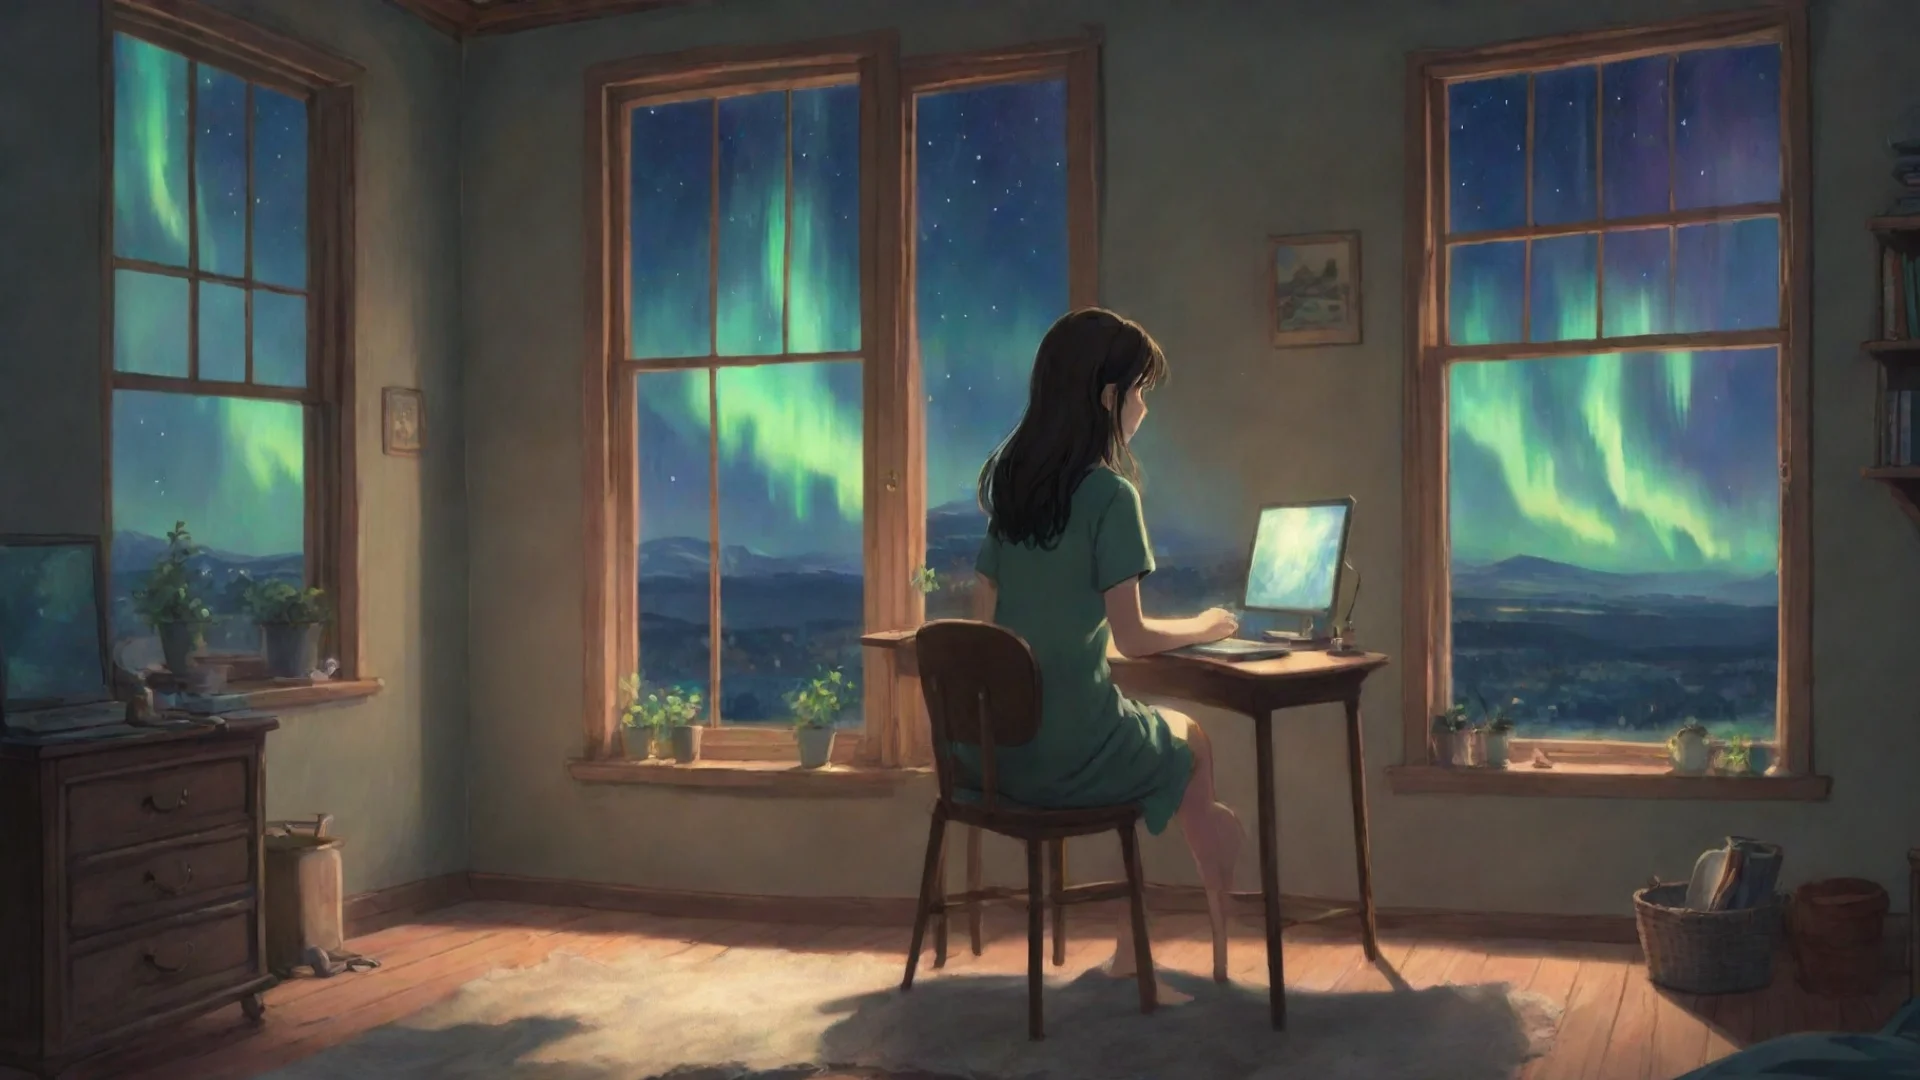 aican you draw of a girl sitting on a chair and using a computer inside of his house and the window is like northern lights in studio ghibli art style hdwidescreen